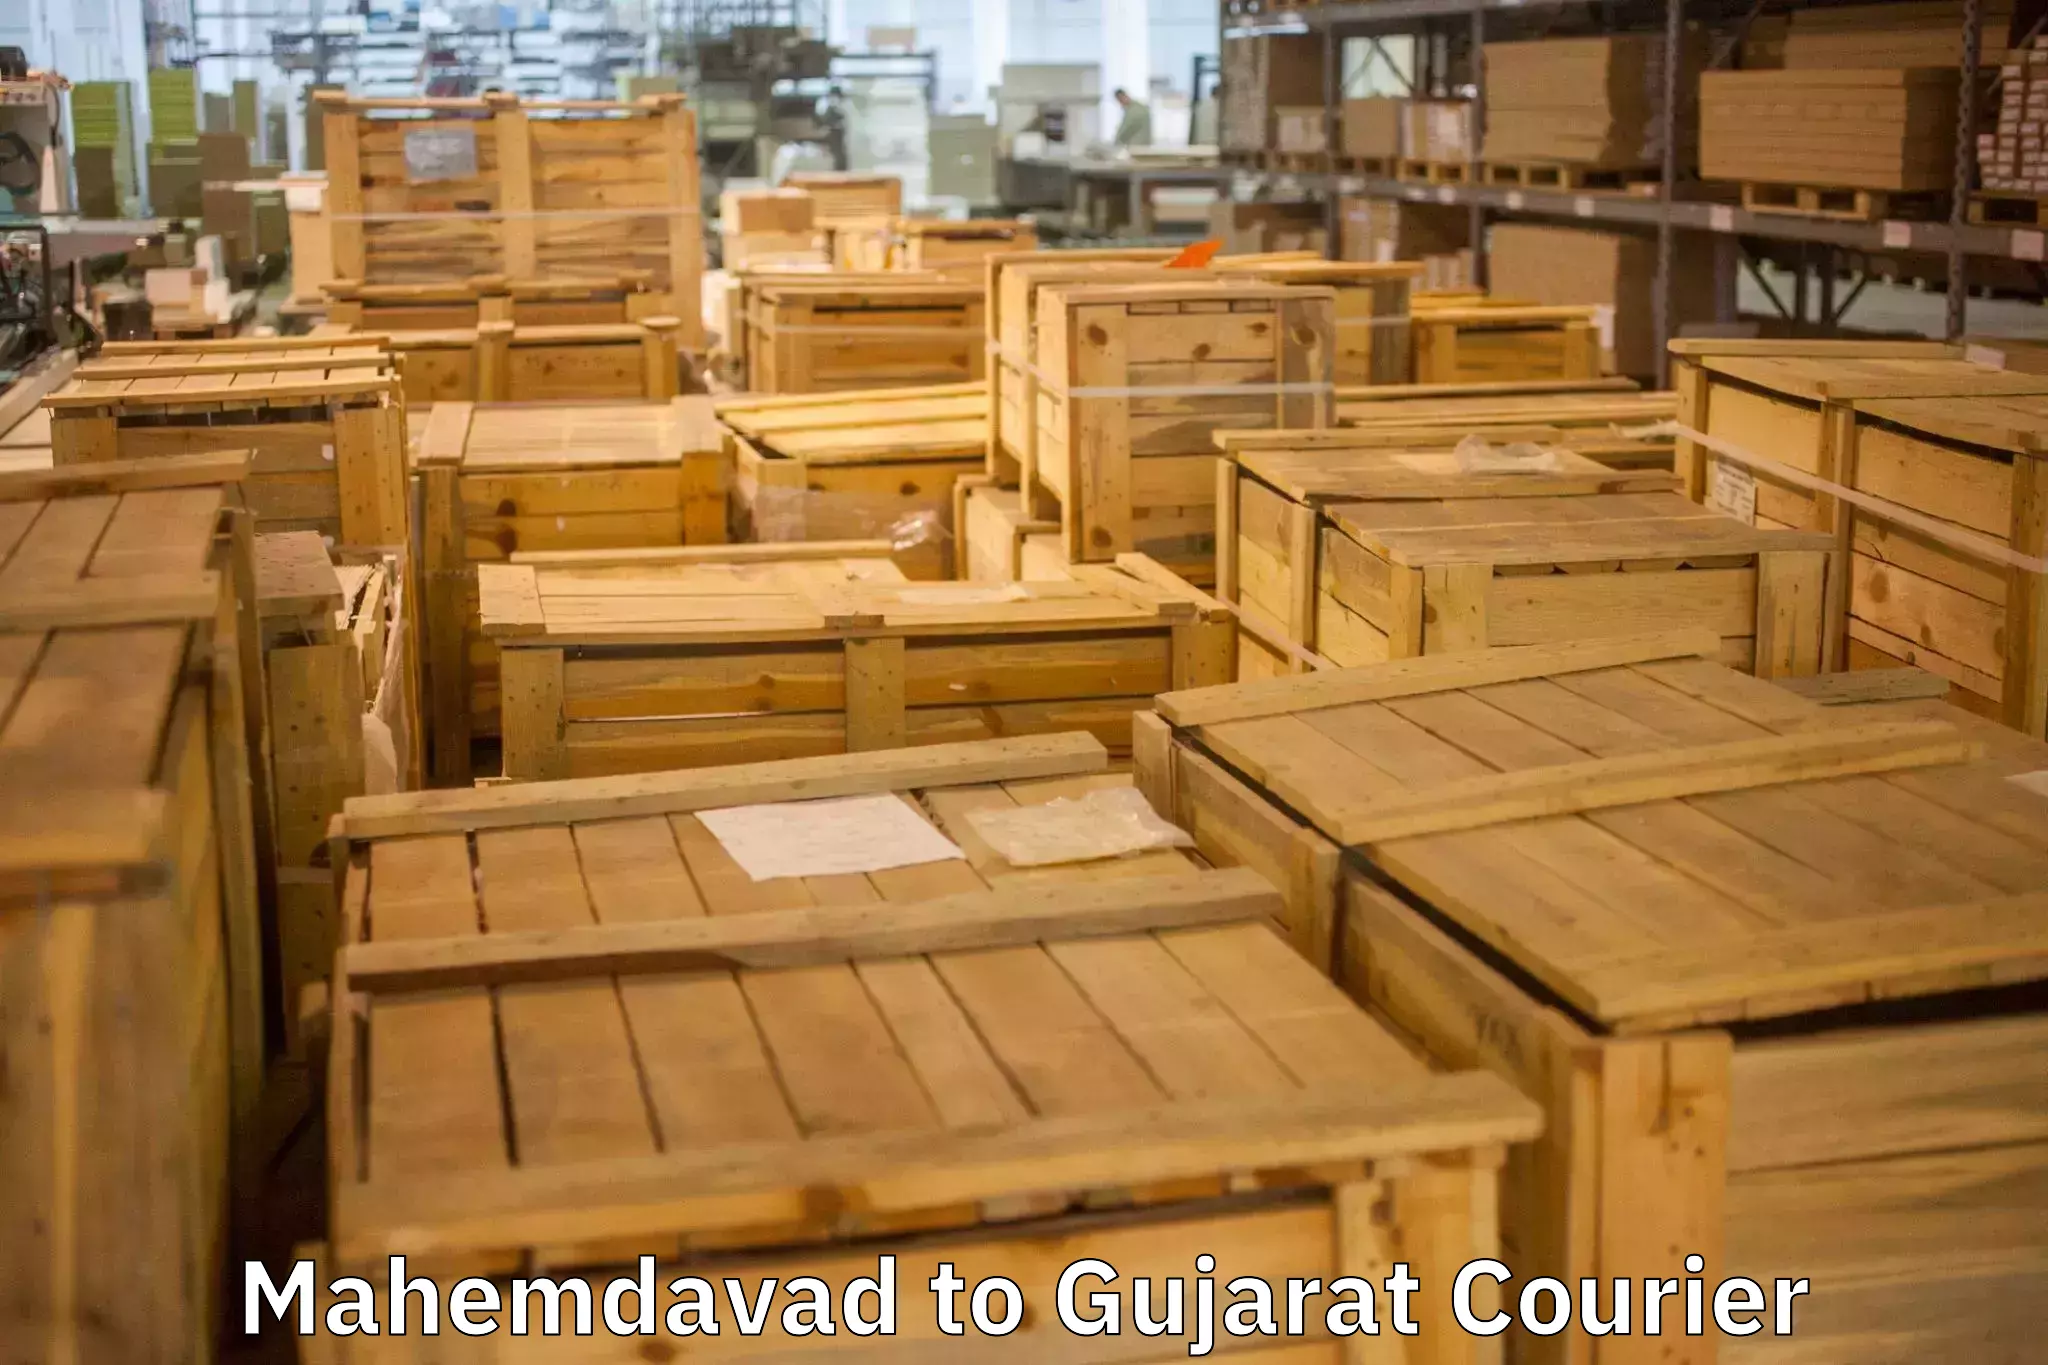 Trusted relocation experts Mahemdavad to Gujarat